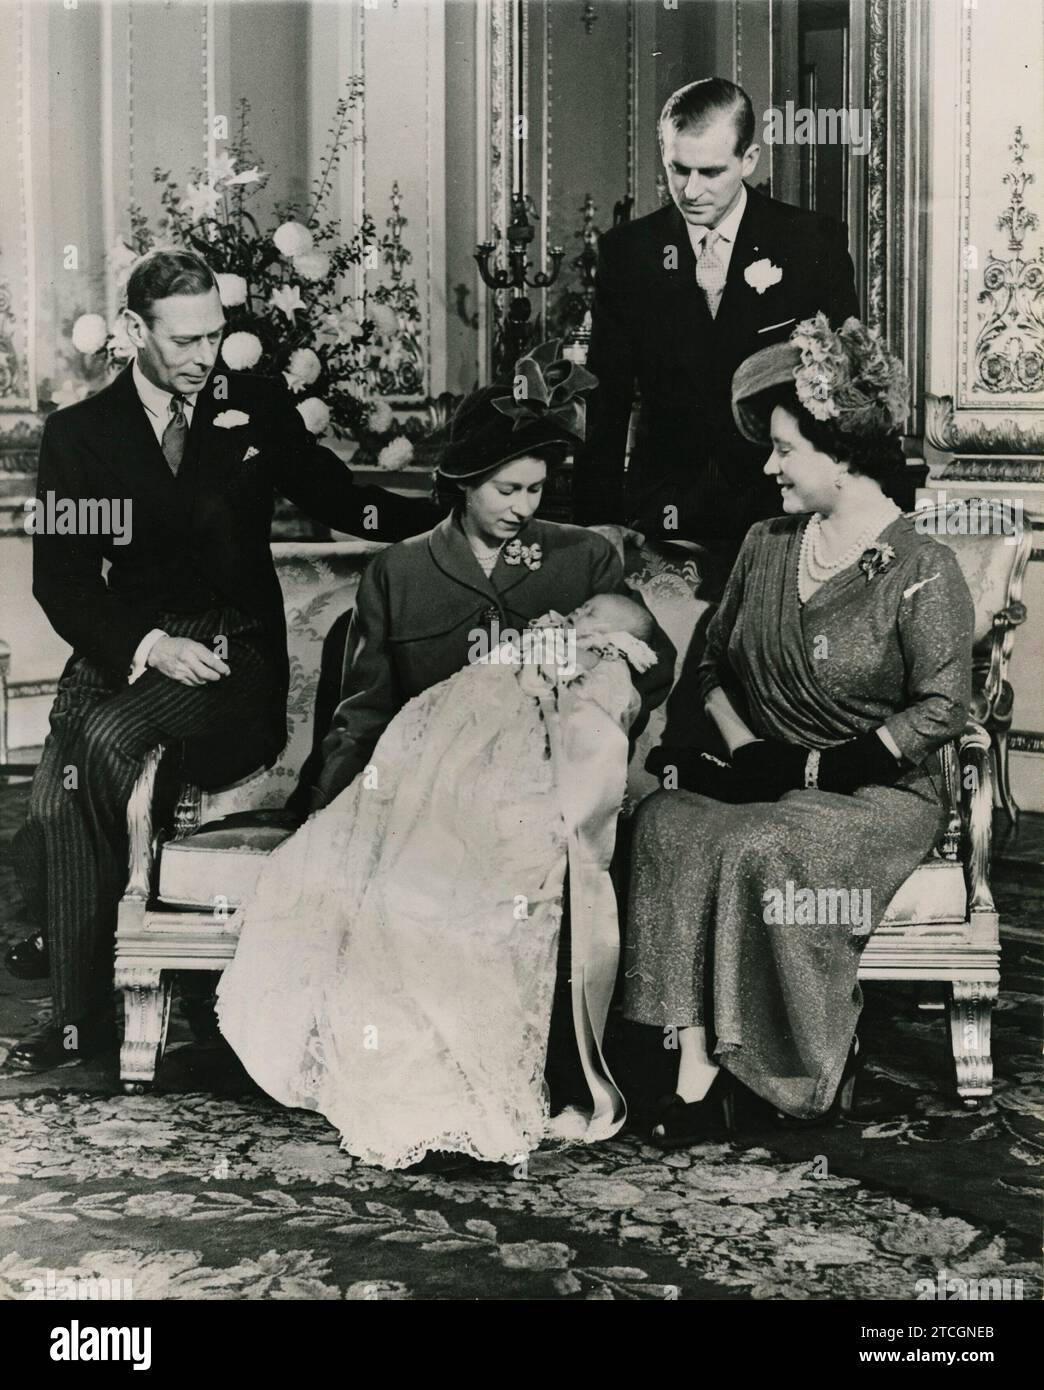 London (United Kingdom), 12/15/1948. Christening of the heir to the Crown of England at Buckingham Palace. The Kings of England, George VI and Elizabeth, with their daughter Princess Elizabeth, her husband, Duke of Edinburgh, and their newborn grandson, Prince Carl Philip Arthur George http://www.abc.es/abcfoto/ galerias/20150212/abci-fotografias-reina-isabel-201502111820.html. Credit: Album / Archivo ABC Stock Photo